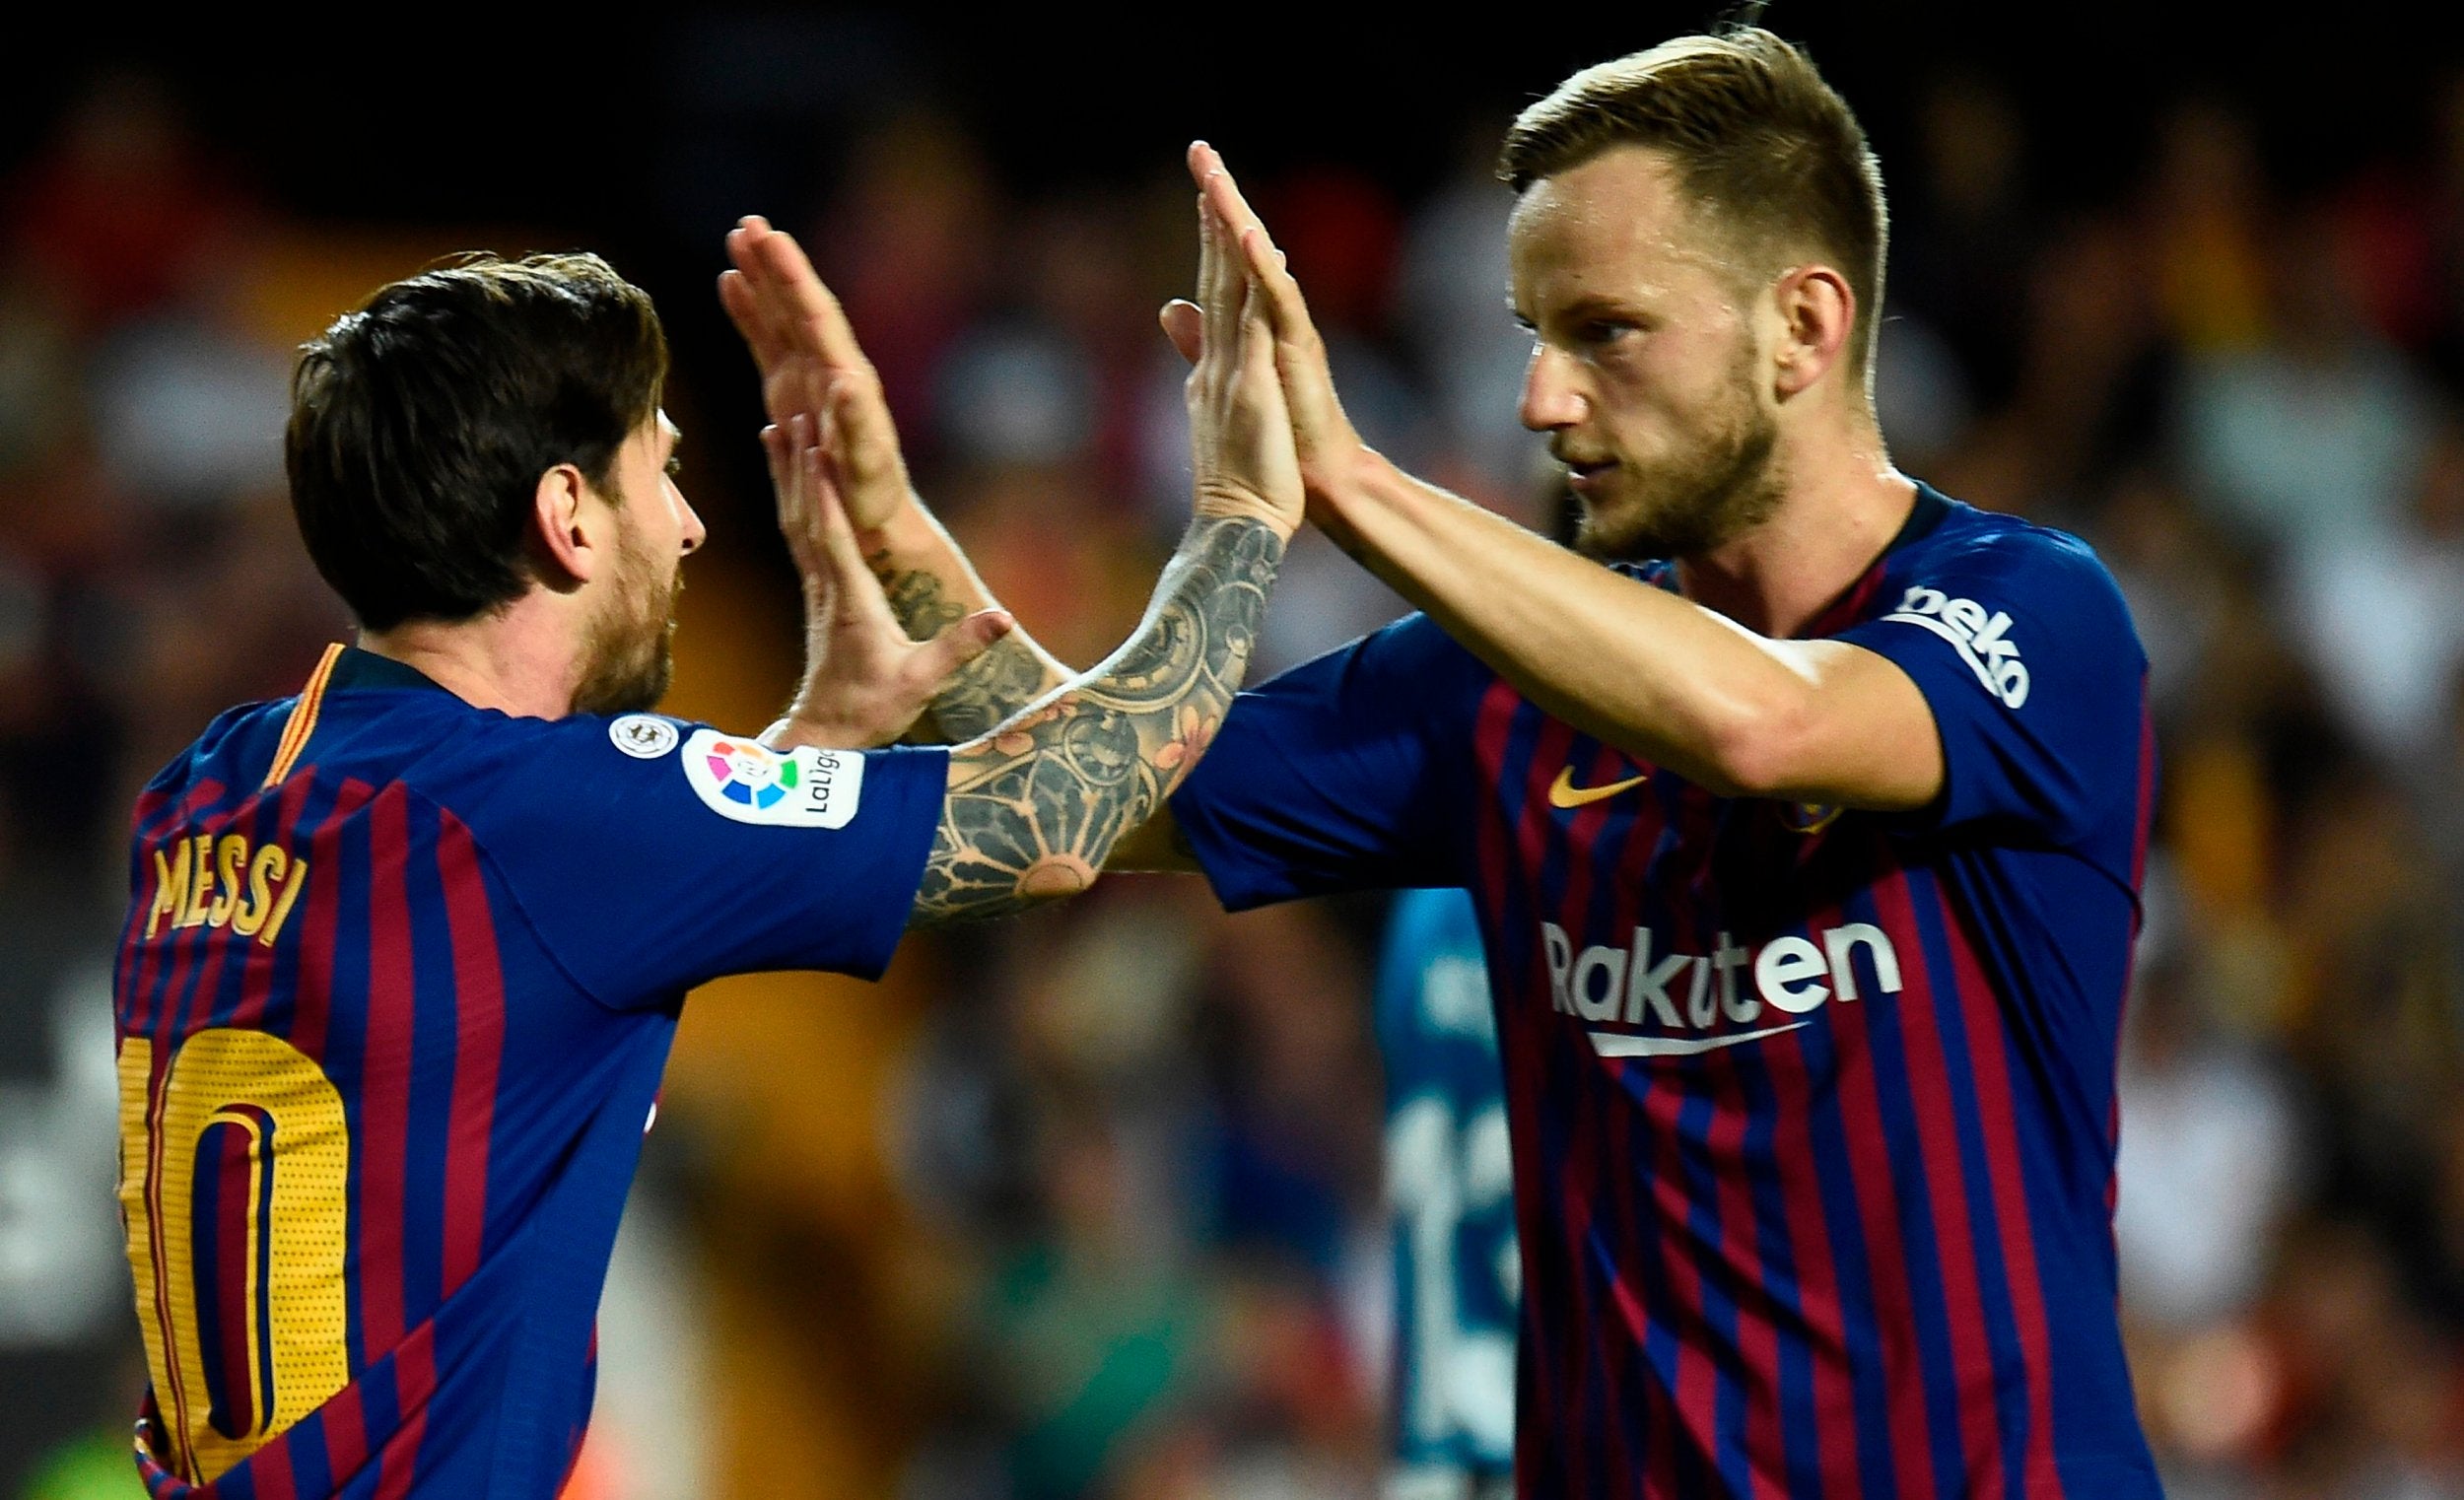 Barcelona vs Sevilla: What time does it start, where can I watch it, odds, form guide and more